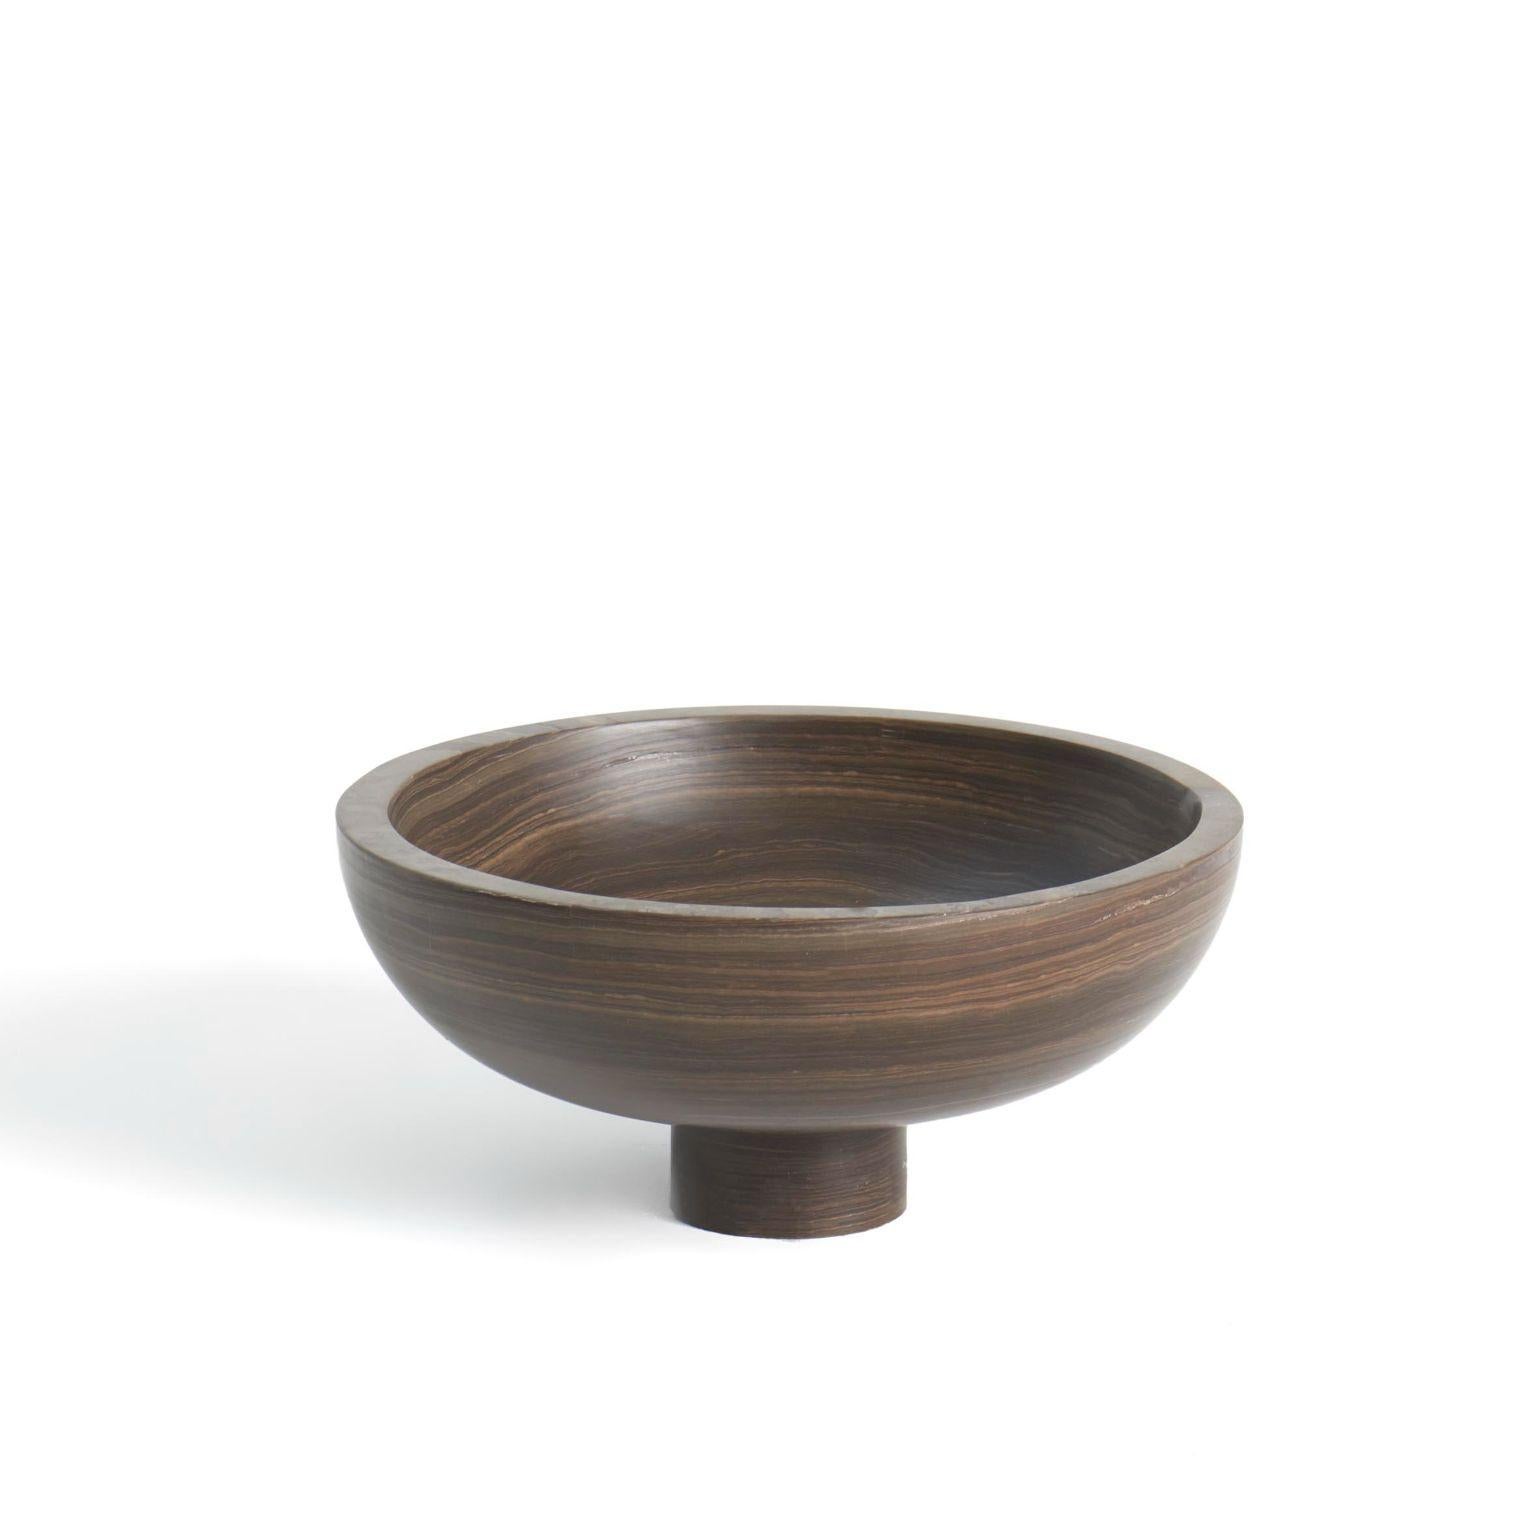 Inside Out Bowl by Karen Chekerdjian
Dimensions: 31 x 14 cm
Materials: Tobacco Brown

Also available: Red, black, tobacco brown marbles

The value of change in a simple act. Karen Chekerdjian’s creation puts design front and centre: from one